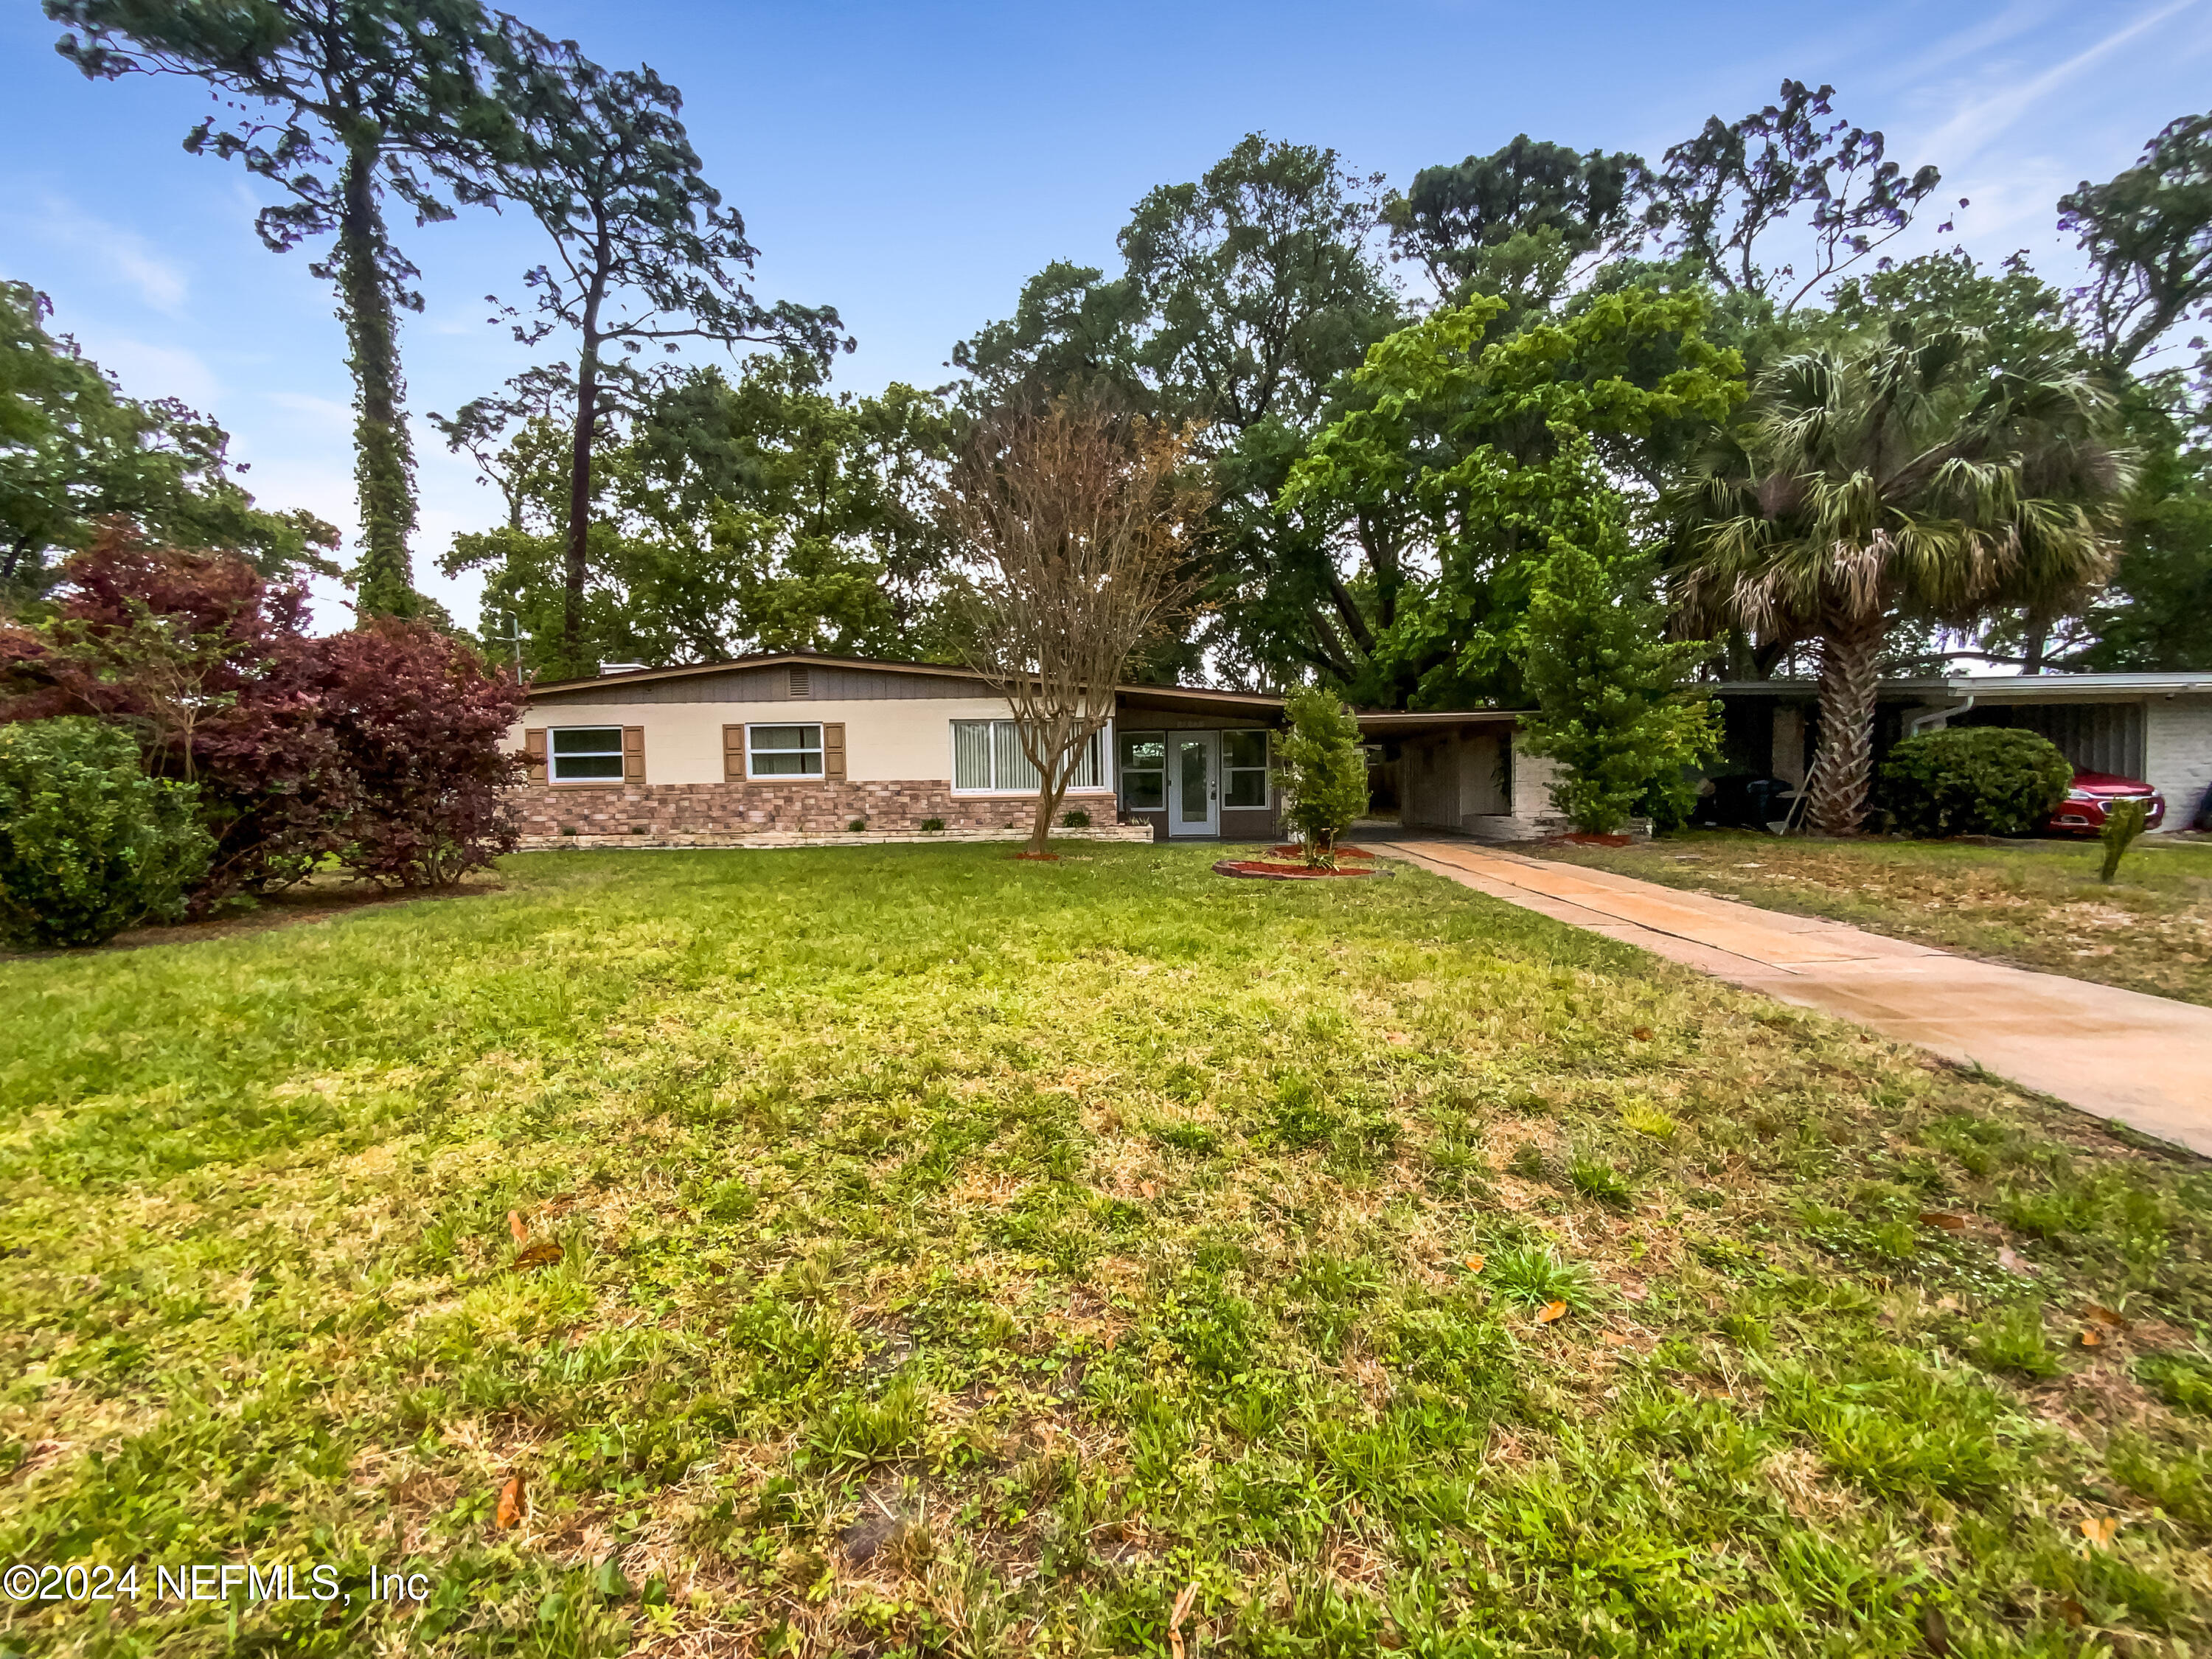 Jacksonville, FL home for sale located at 3645 Pizarro Road, Jacksonville, FL 32217